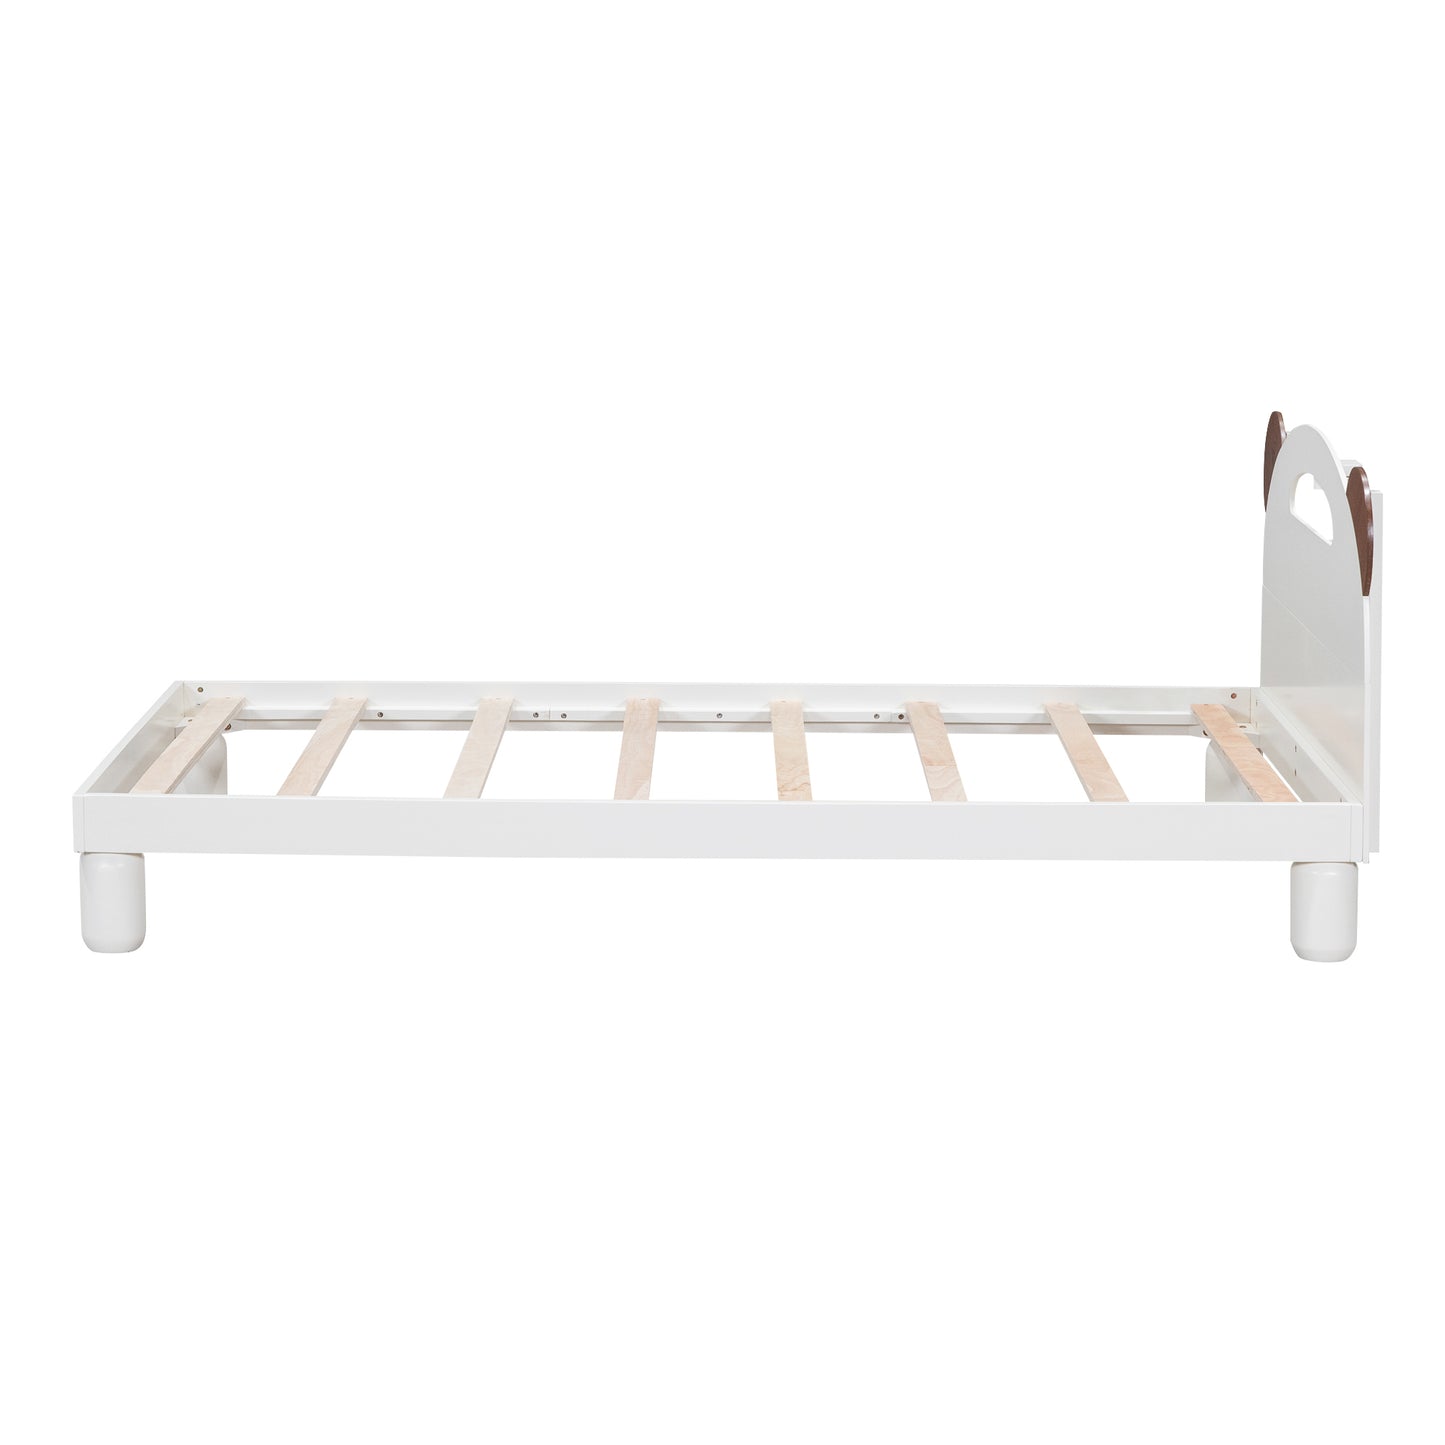 Twin Size Platform Bed with Bear Ears Shaped Headboard and LED, Cream White